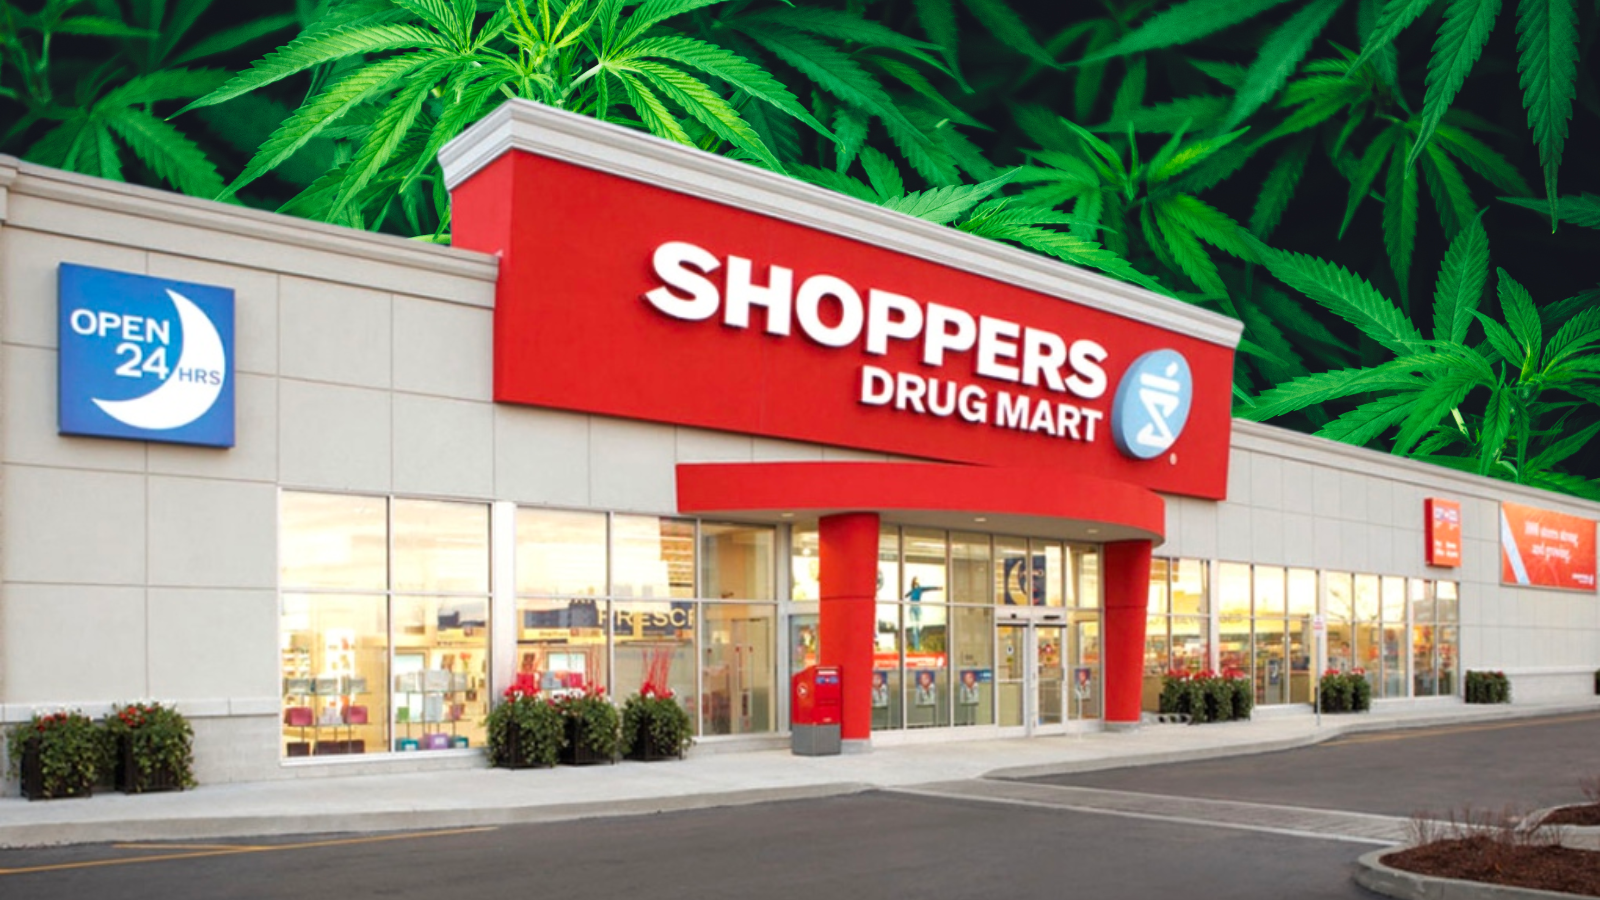 Avicanna’s Successful Shoppers Drug Mart Purchase